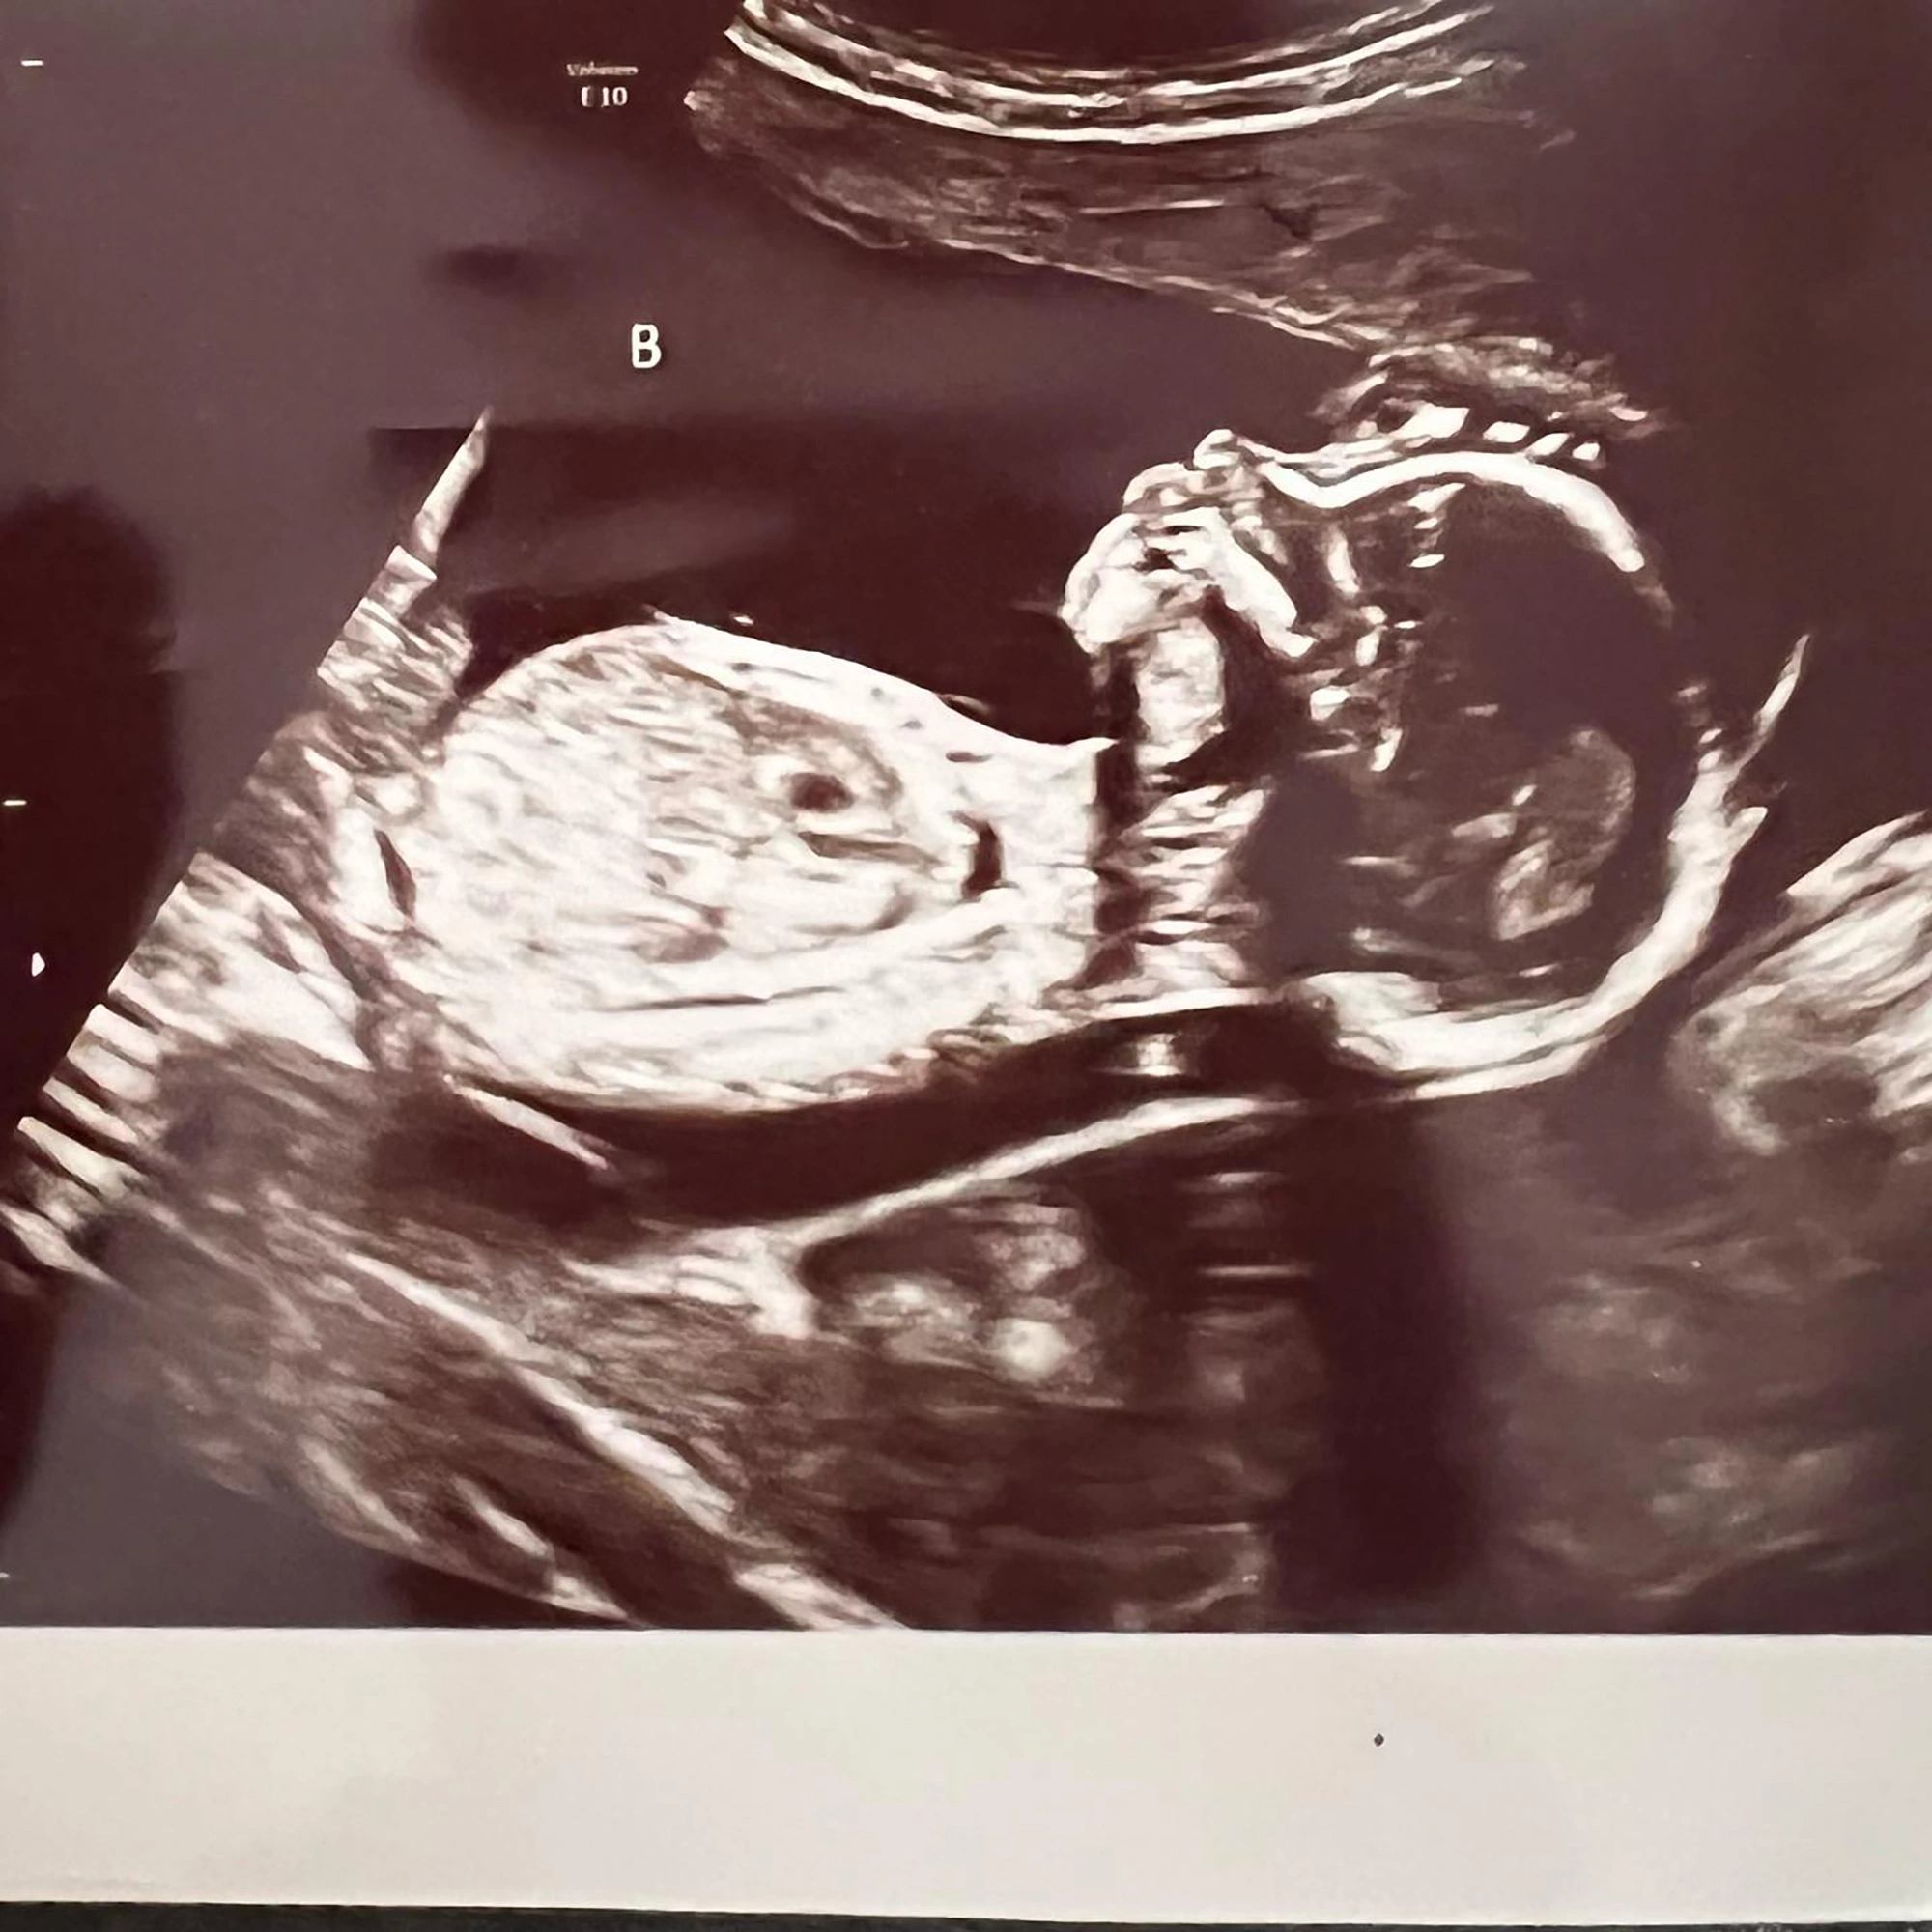 The two set twins ultrasound